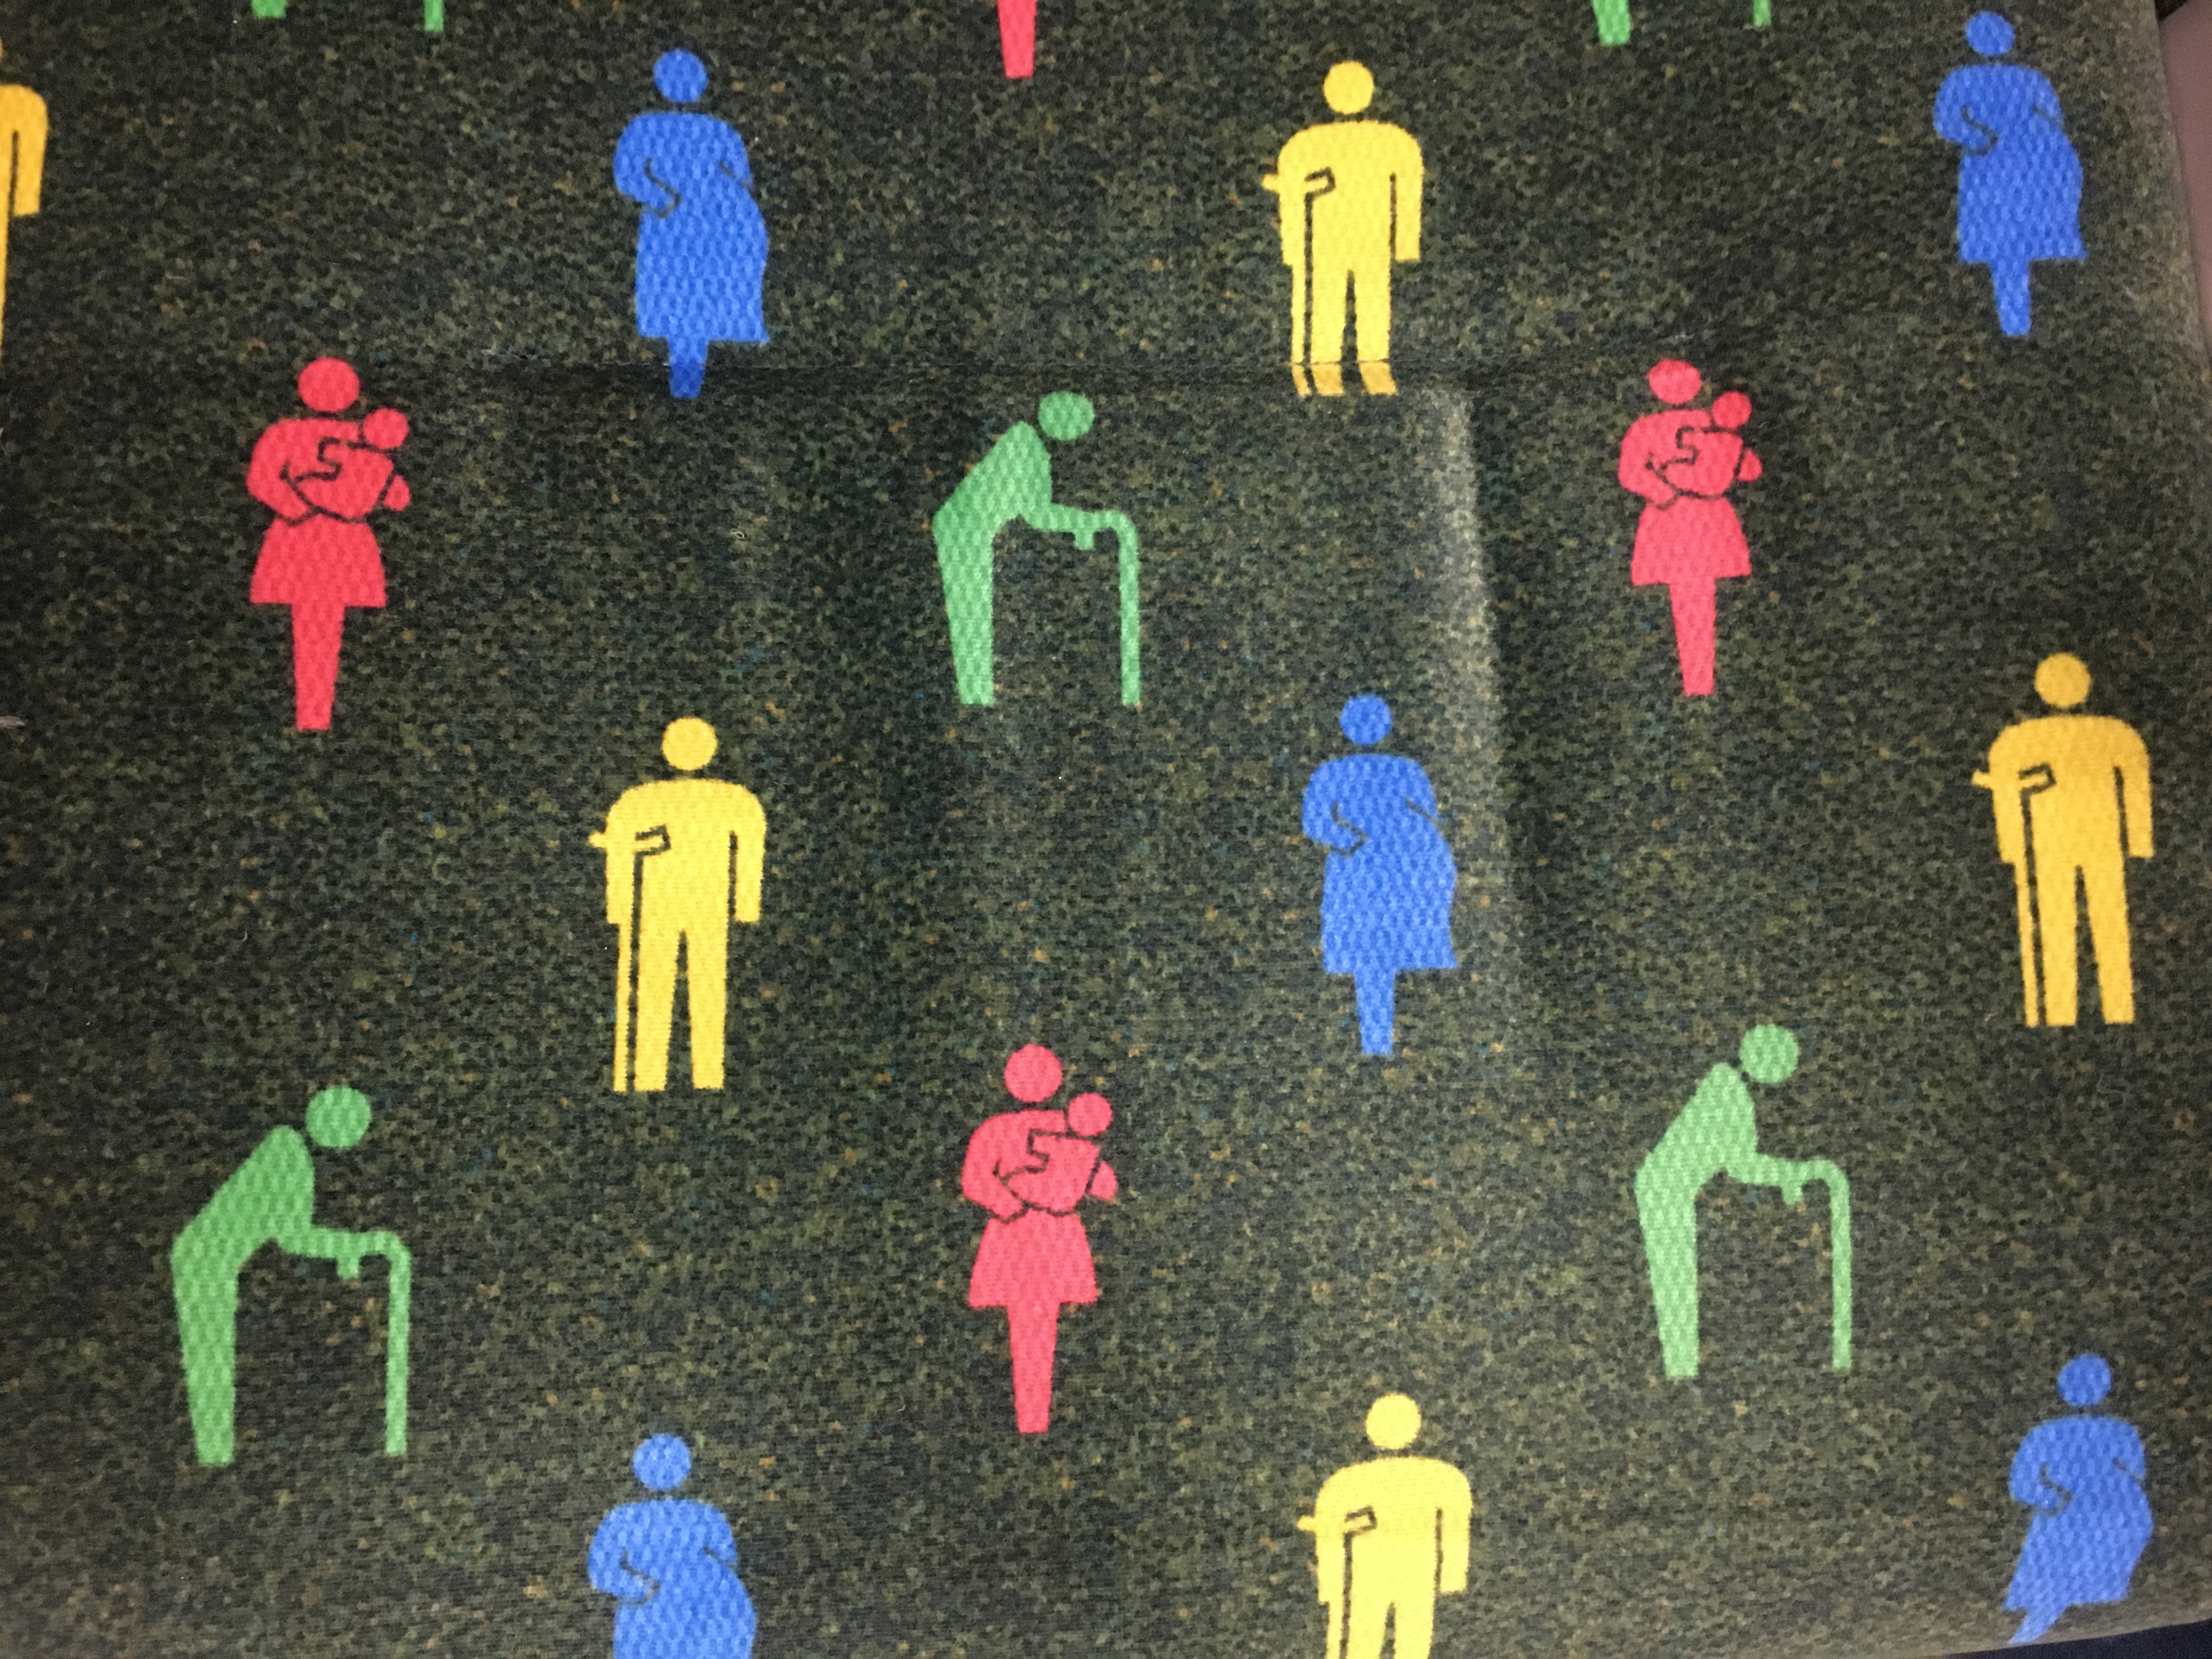 People with disabilities and needs are featured on this print: person with a cane, mother with baby, person with crutch, pregnant woman.